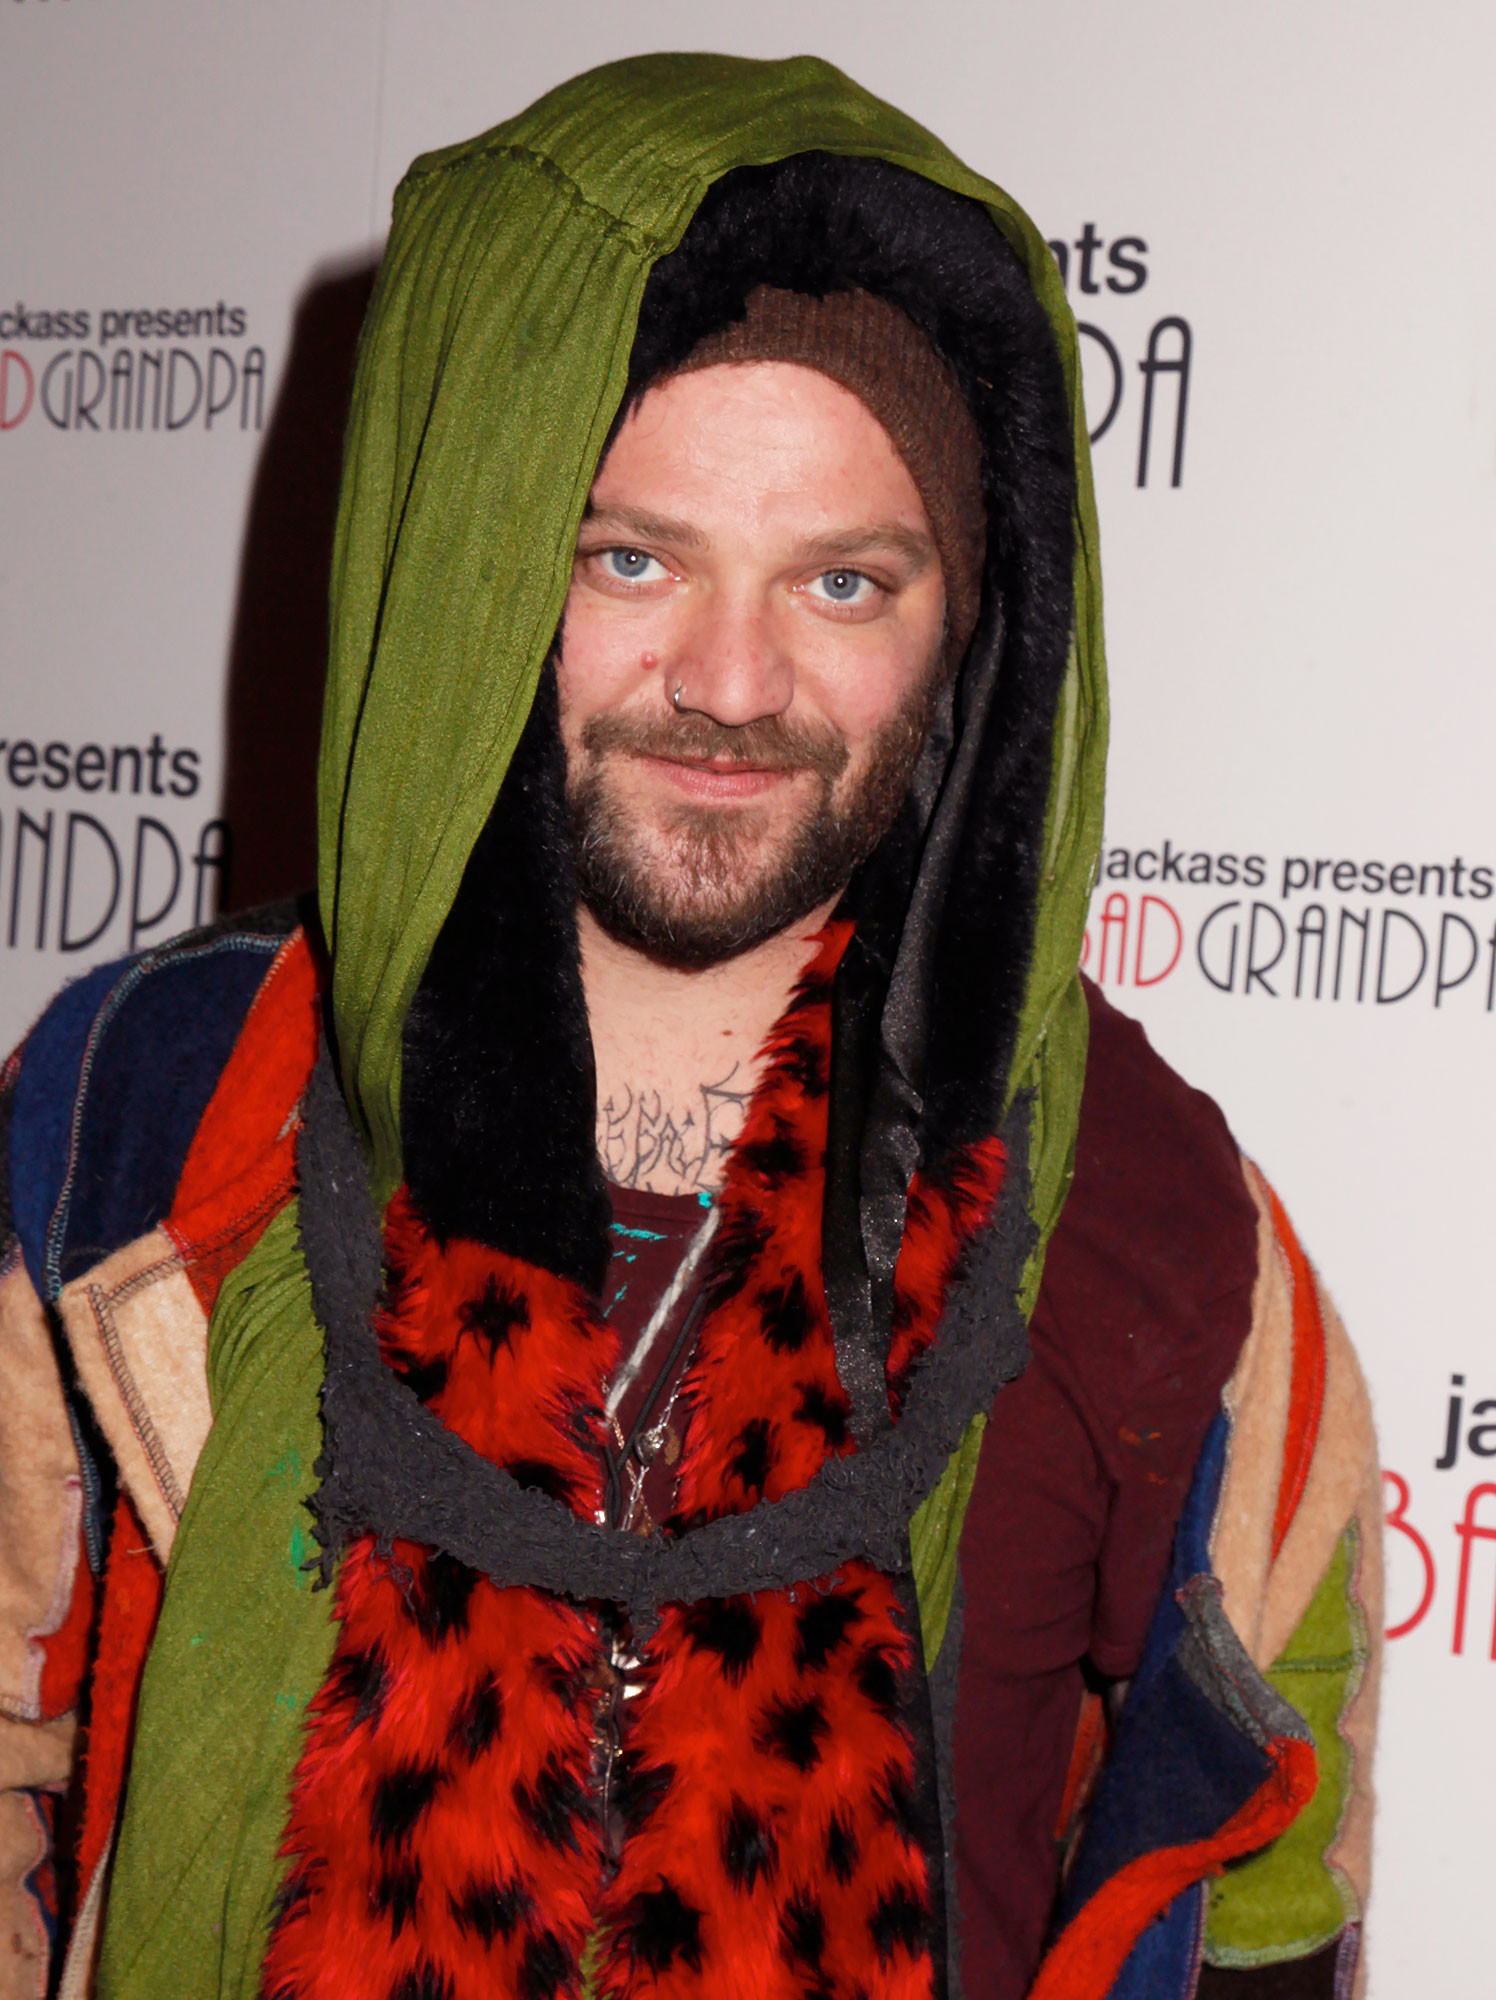 Devi McCallion on Twitter That moment you realize Bam Margera had the  horny womb tattoo 15 years before anyone else httpstcoLu8F4lnYk9   Twitter